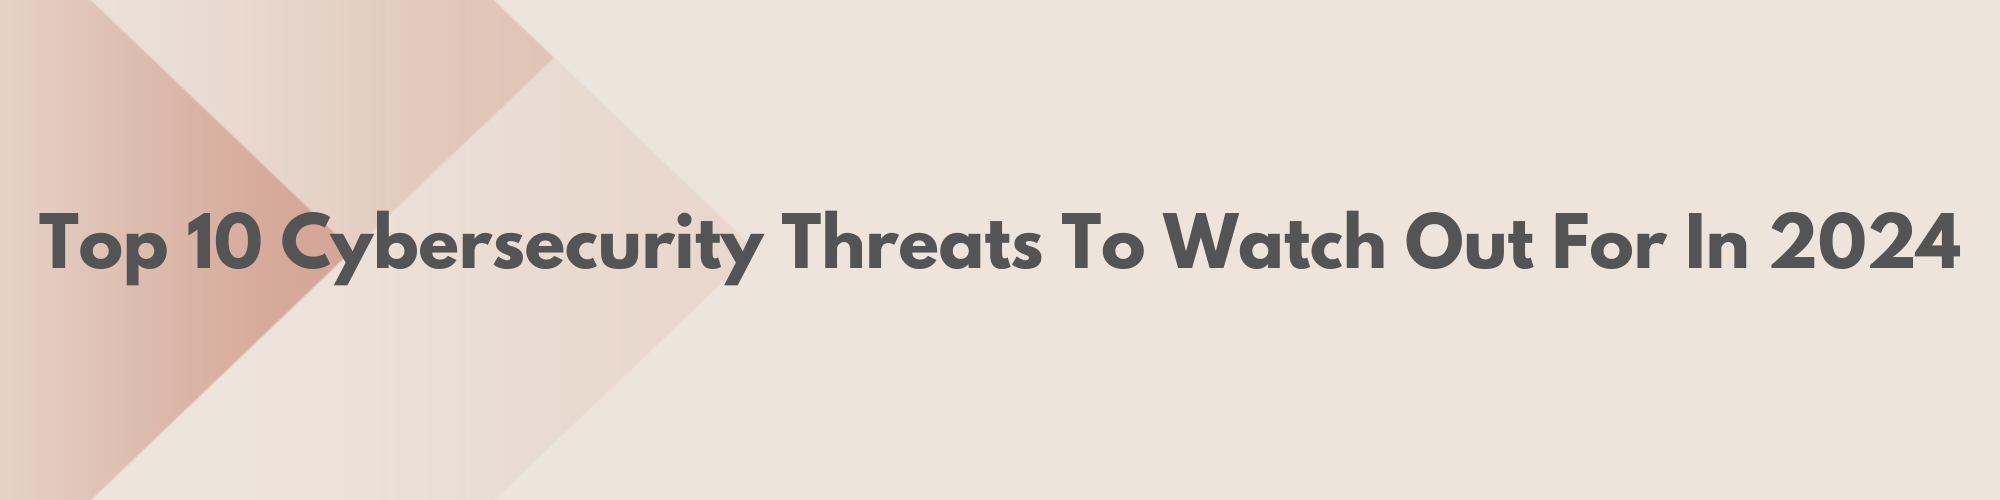 Top 10 Cybersecurity Threats to Watch Out For in 2024